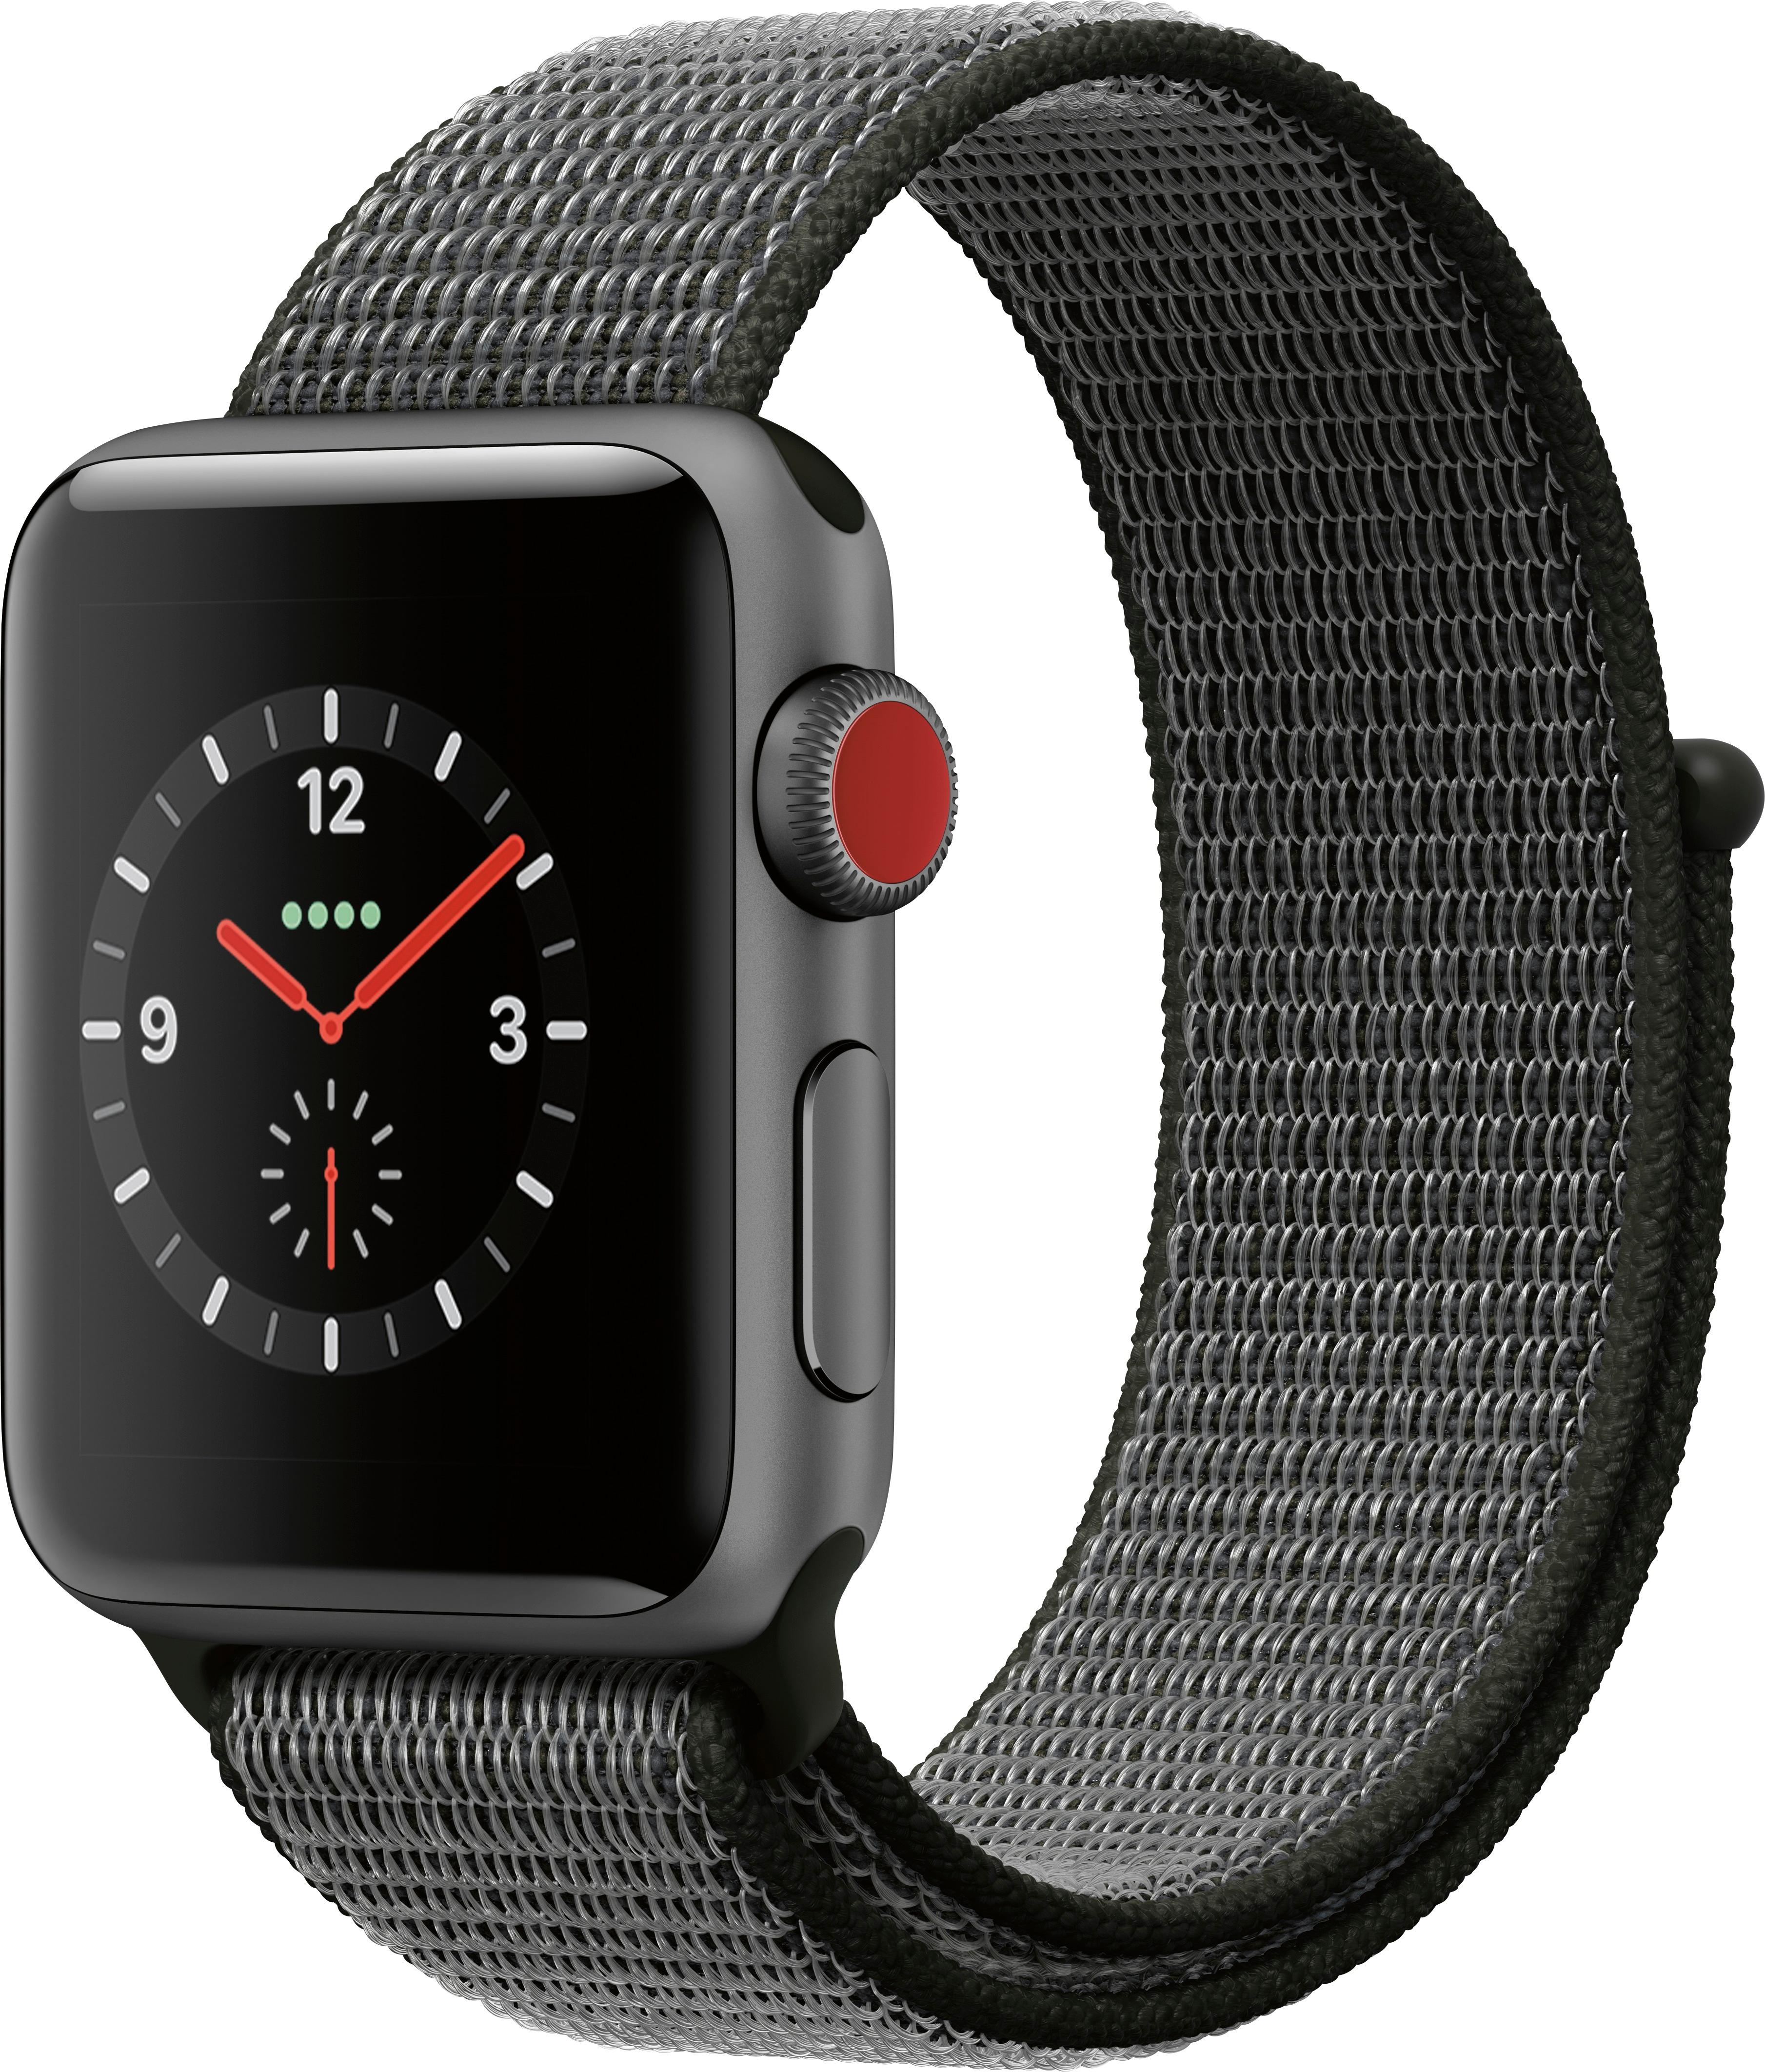 Angle View: Apple Watch Nike SE (GPS + Cellular) 40mm Space Gray Aluminum Case with Anthracite/Black Nike Sport Band - Space Gray